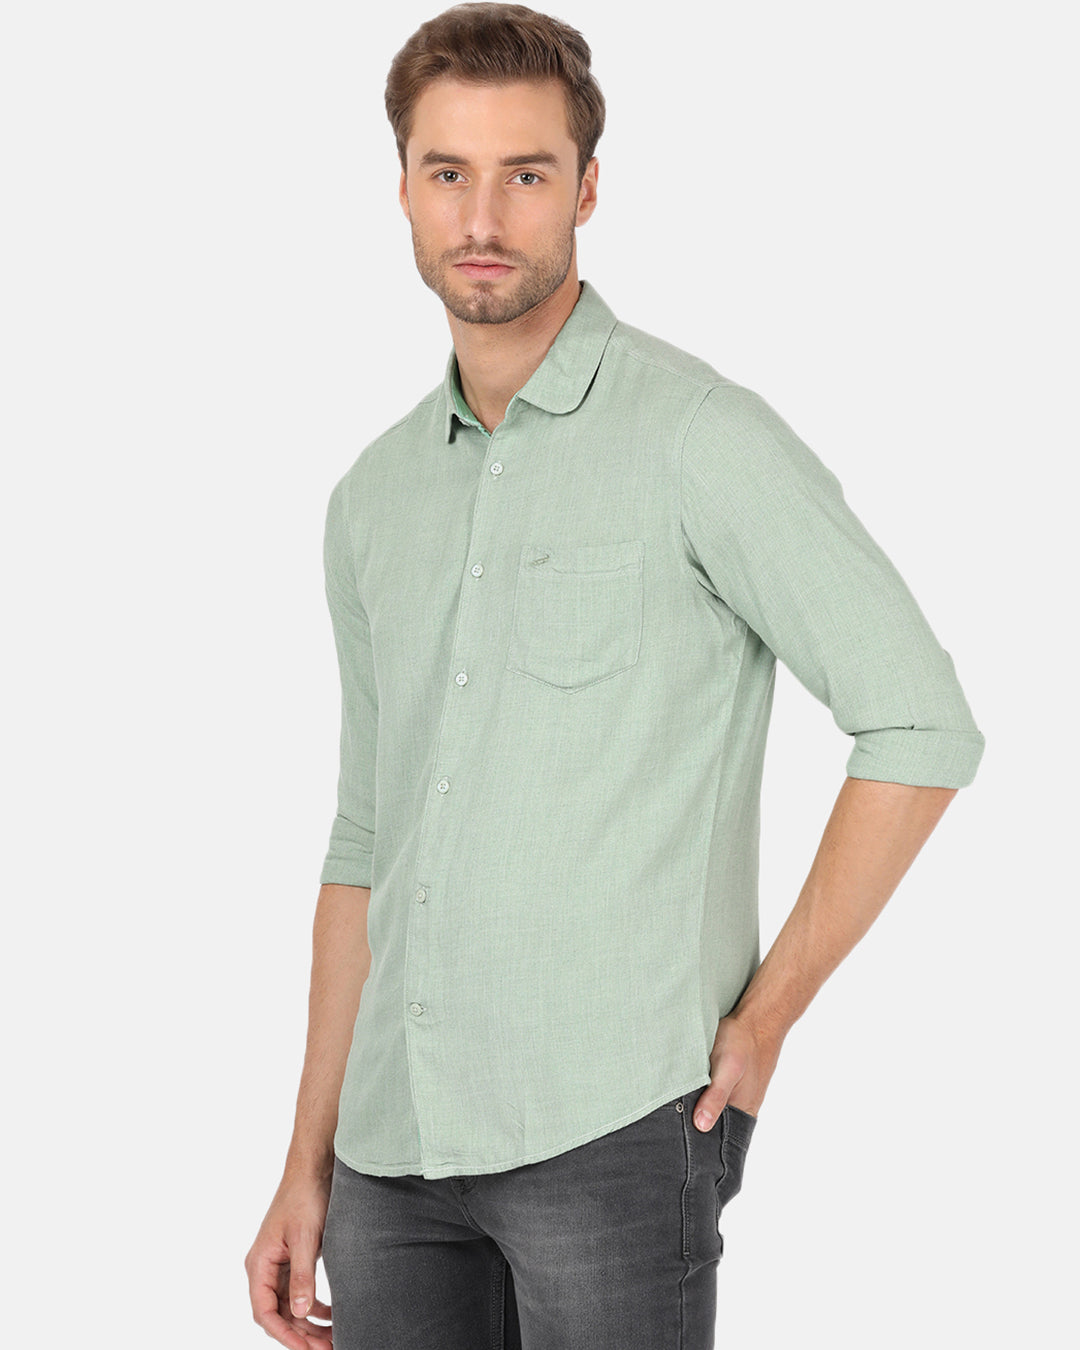 Crocodile Casual Full Sleeve Comfort Fit Solid Green with Collar Shirt for Men